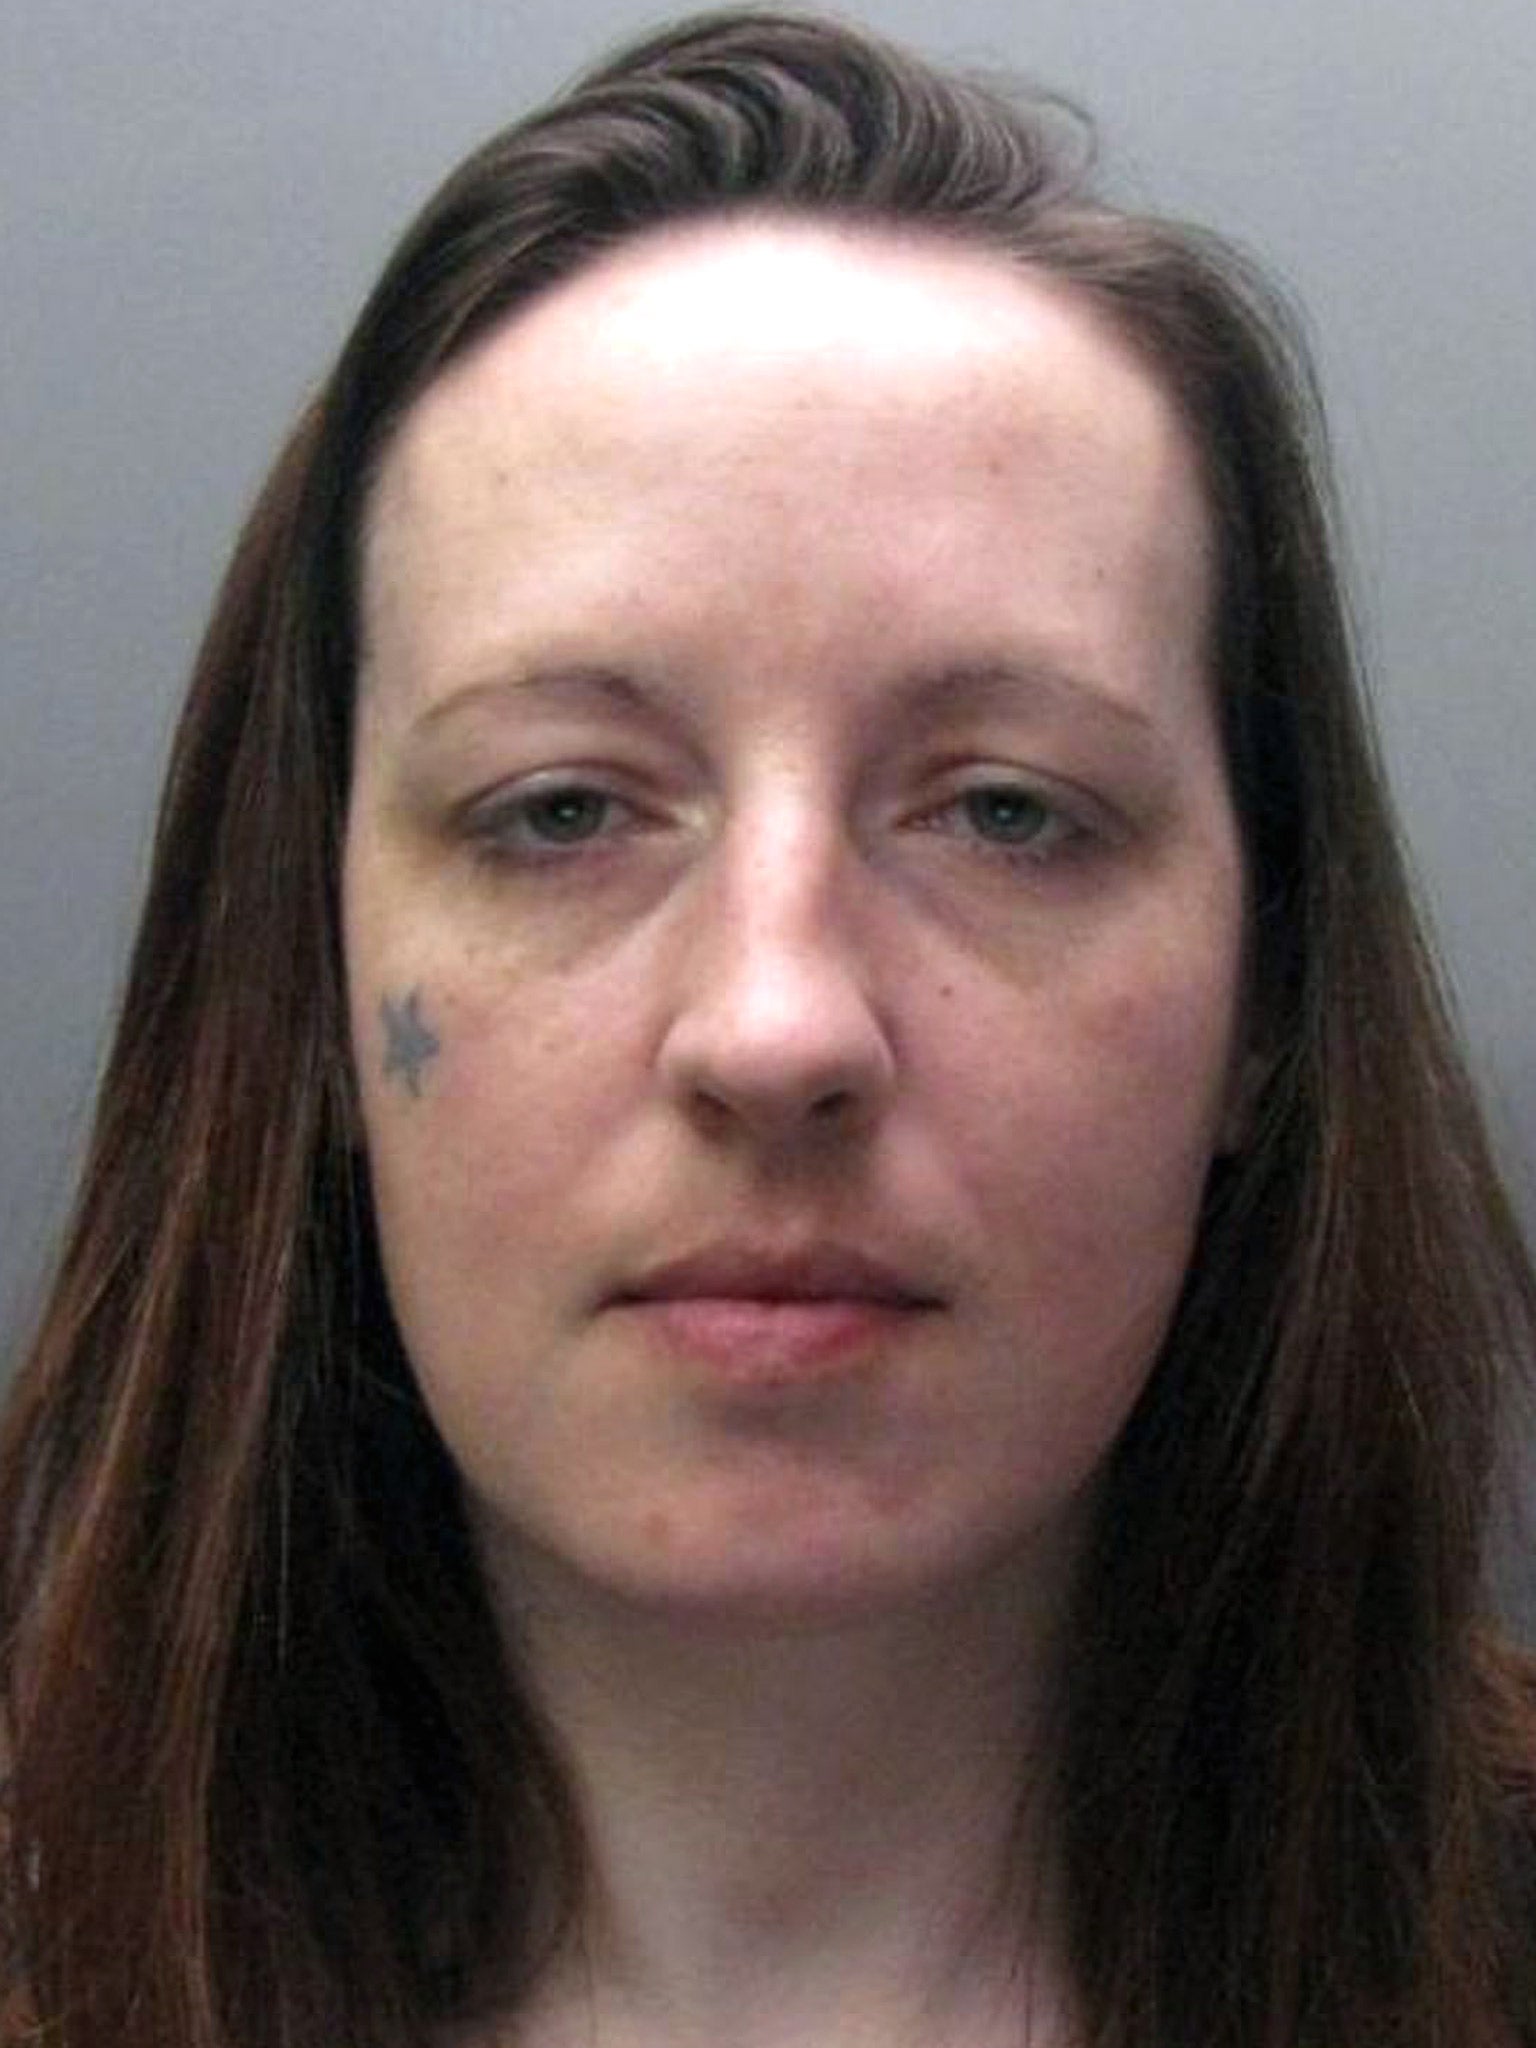 Joanna Dennehy Female Serial Killer S Victims Were ‘fatally Attracted To Her The Independent